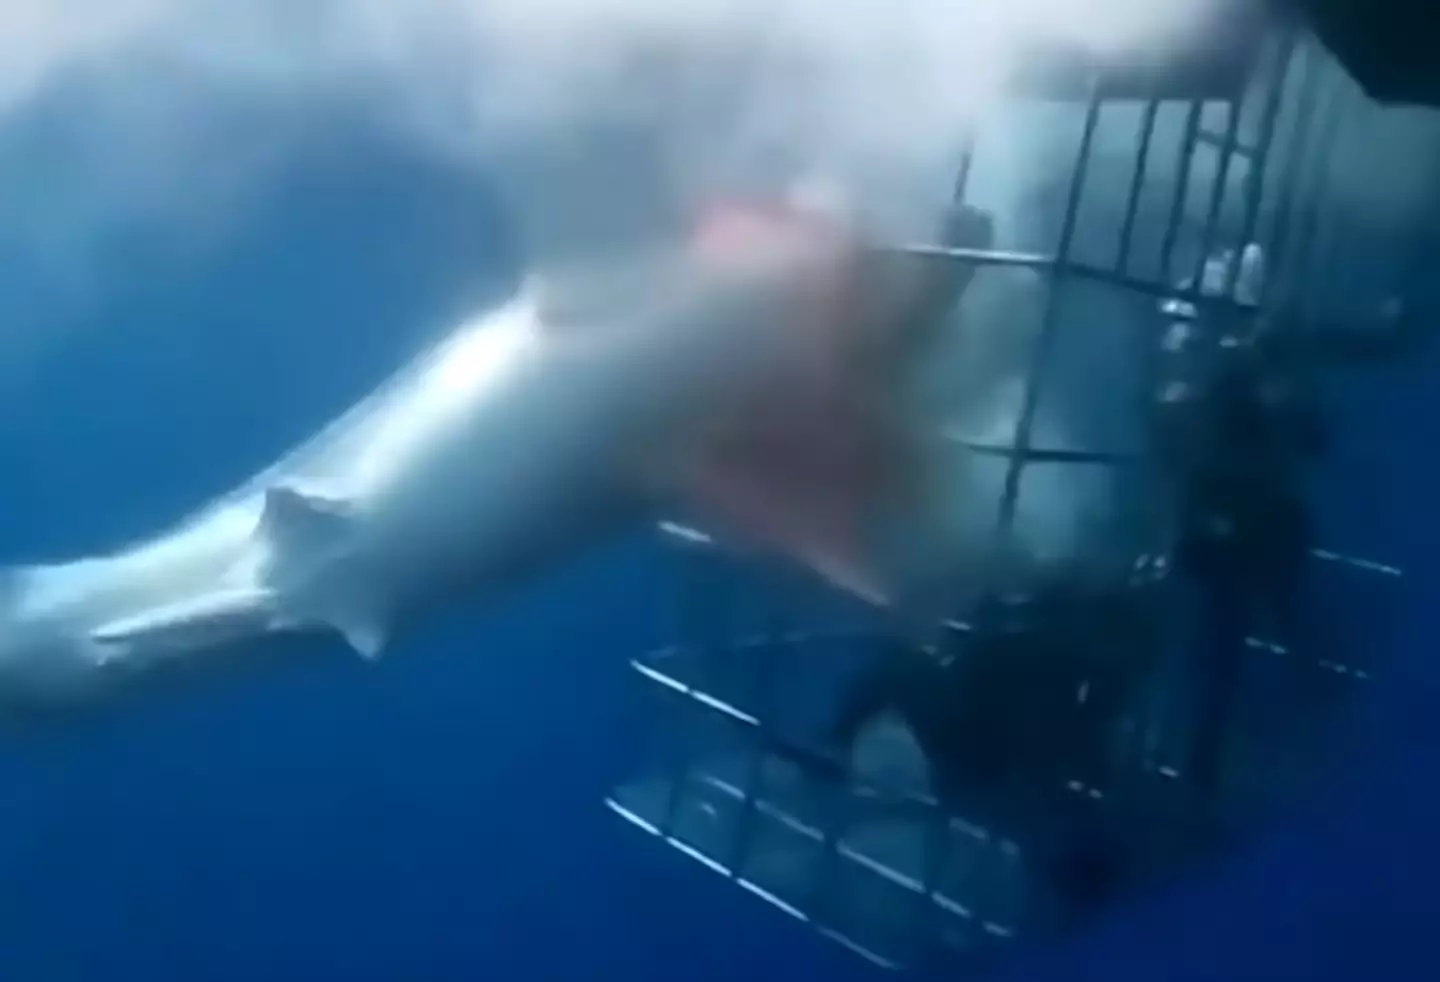 The shark got stuck trying to get into the diving cage.